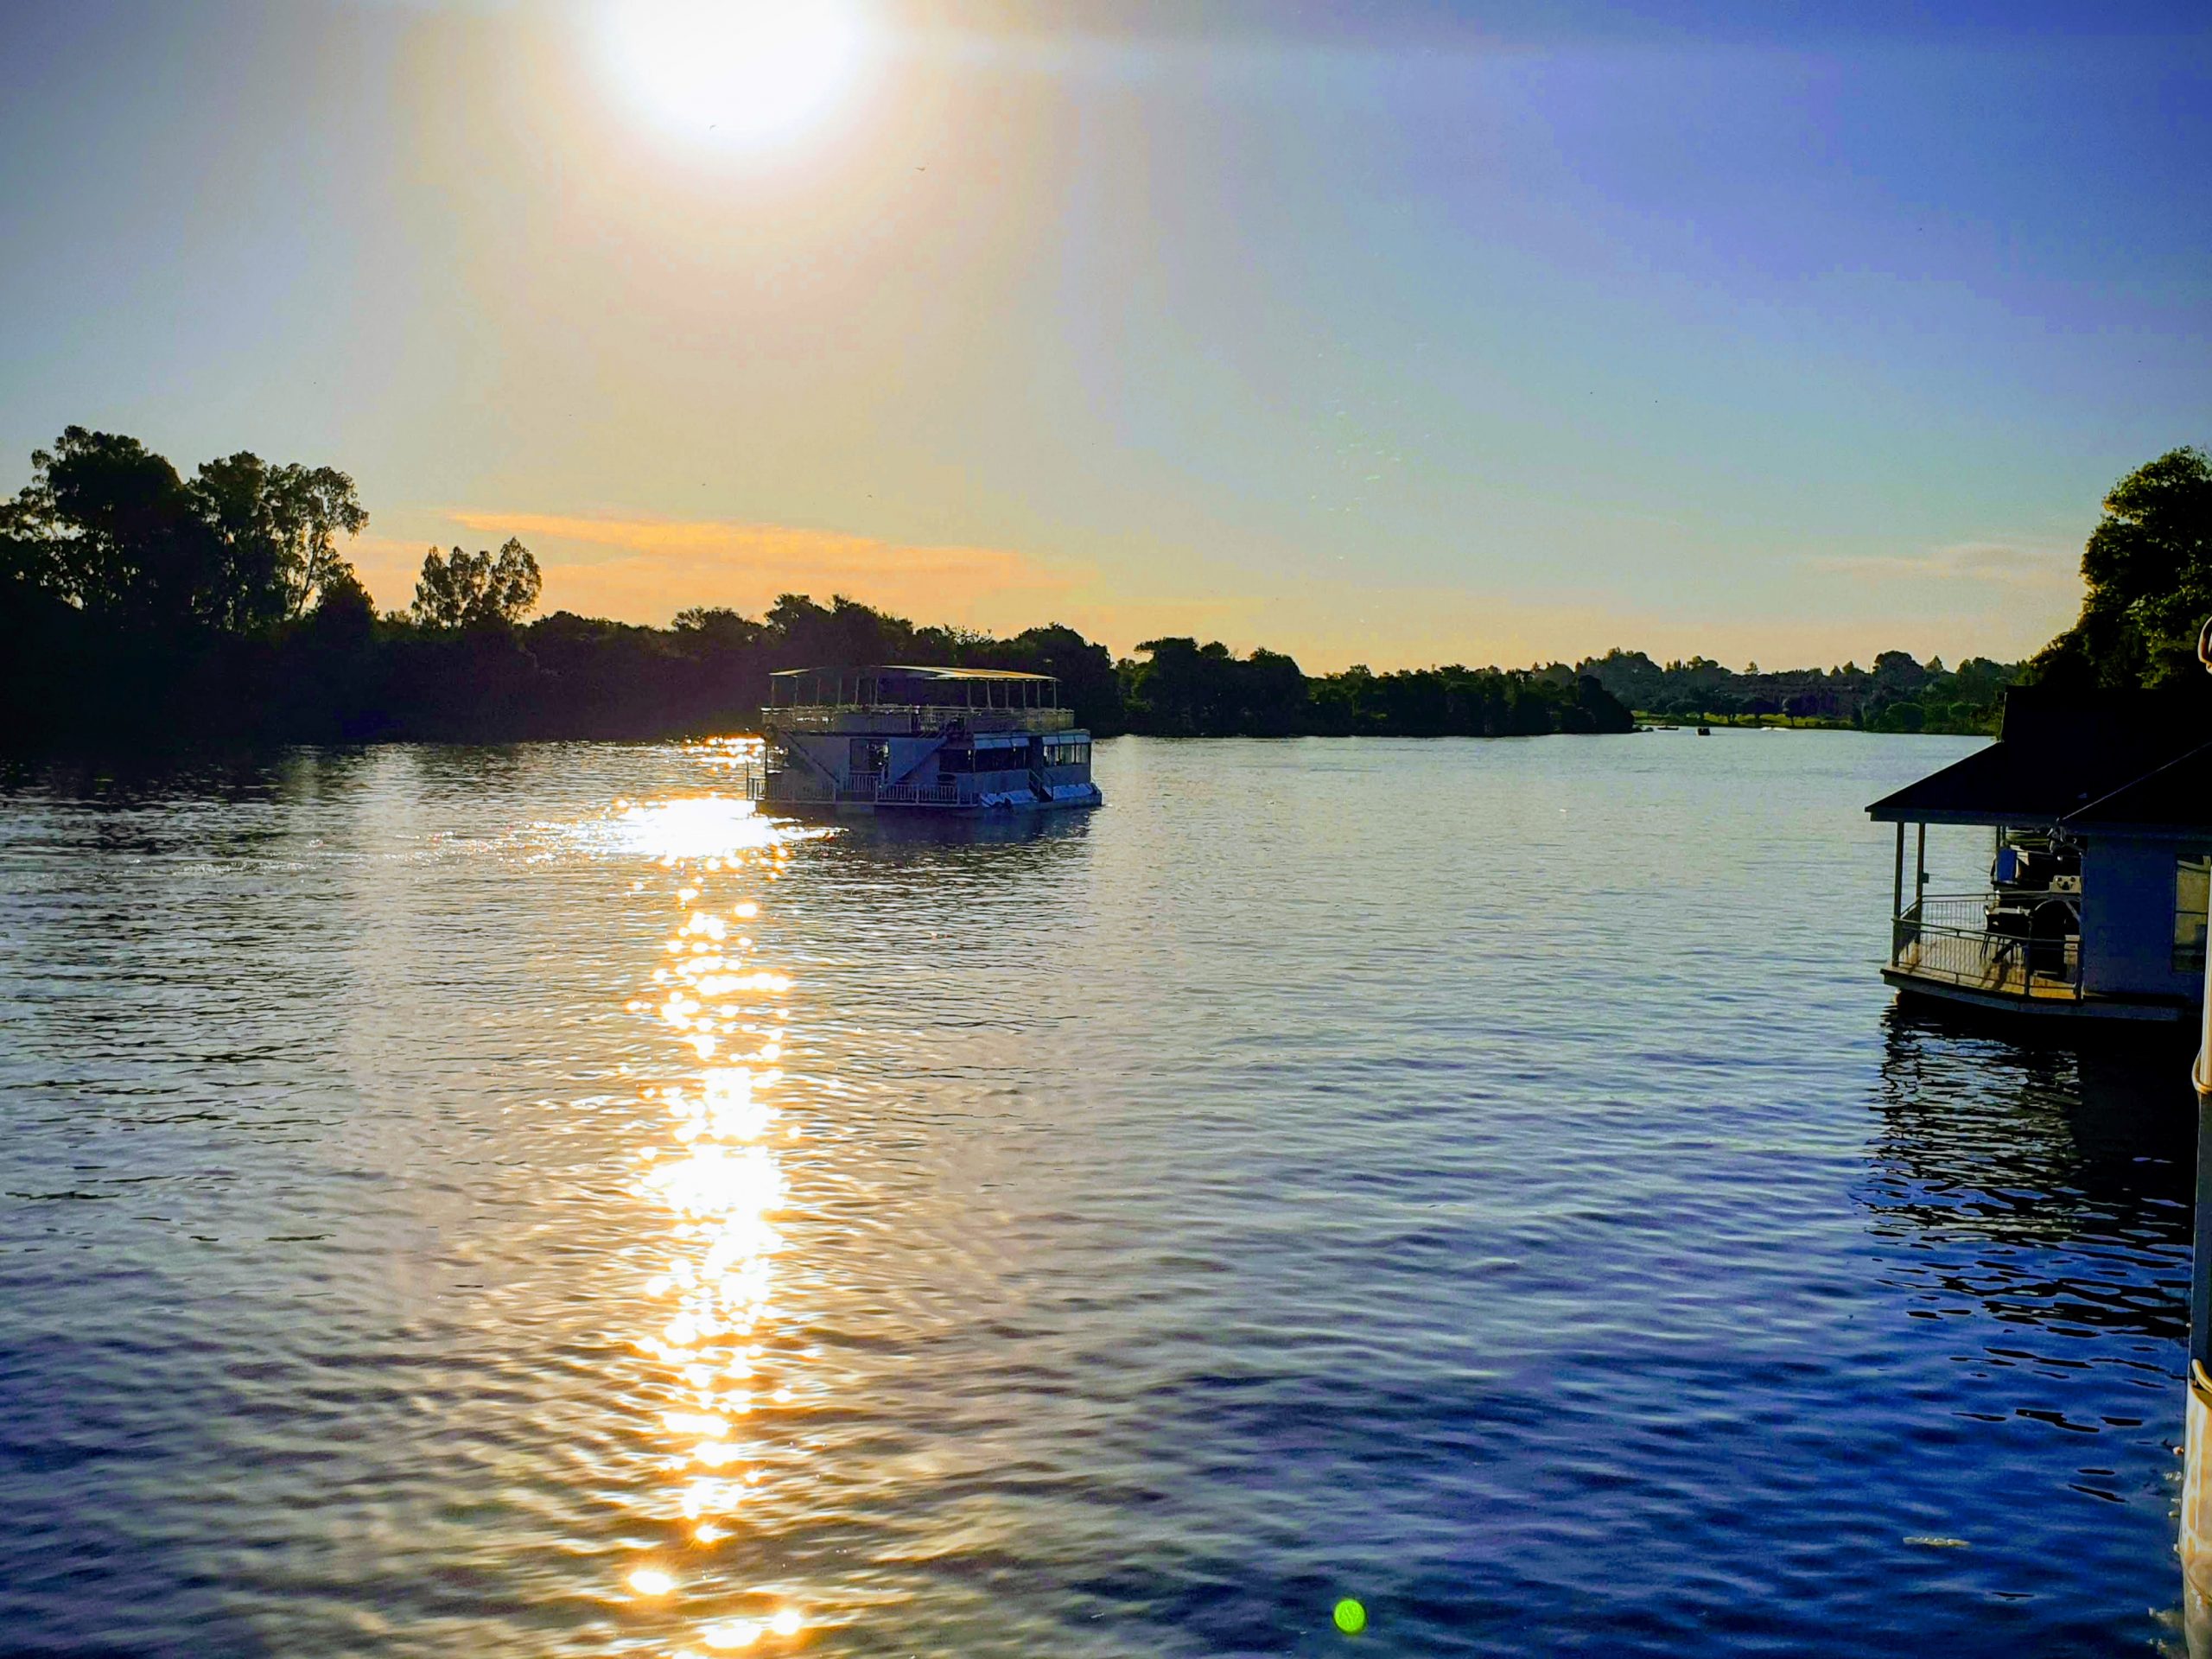 vaal boat cruise buffet prices